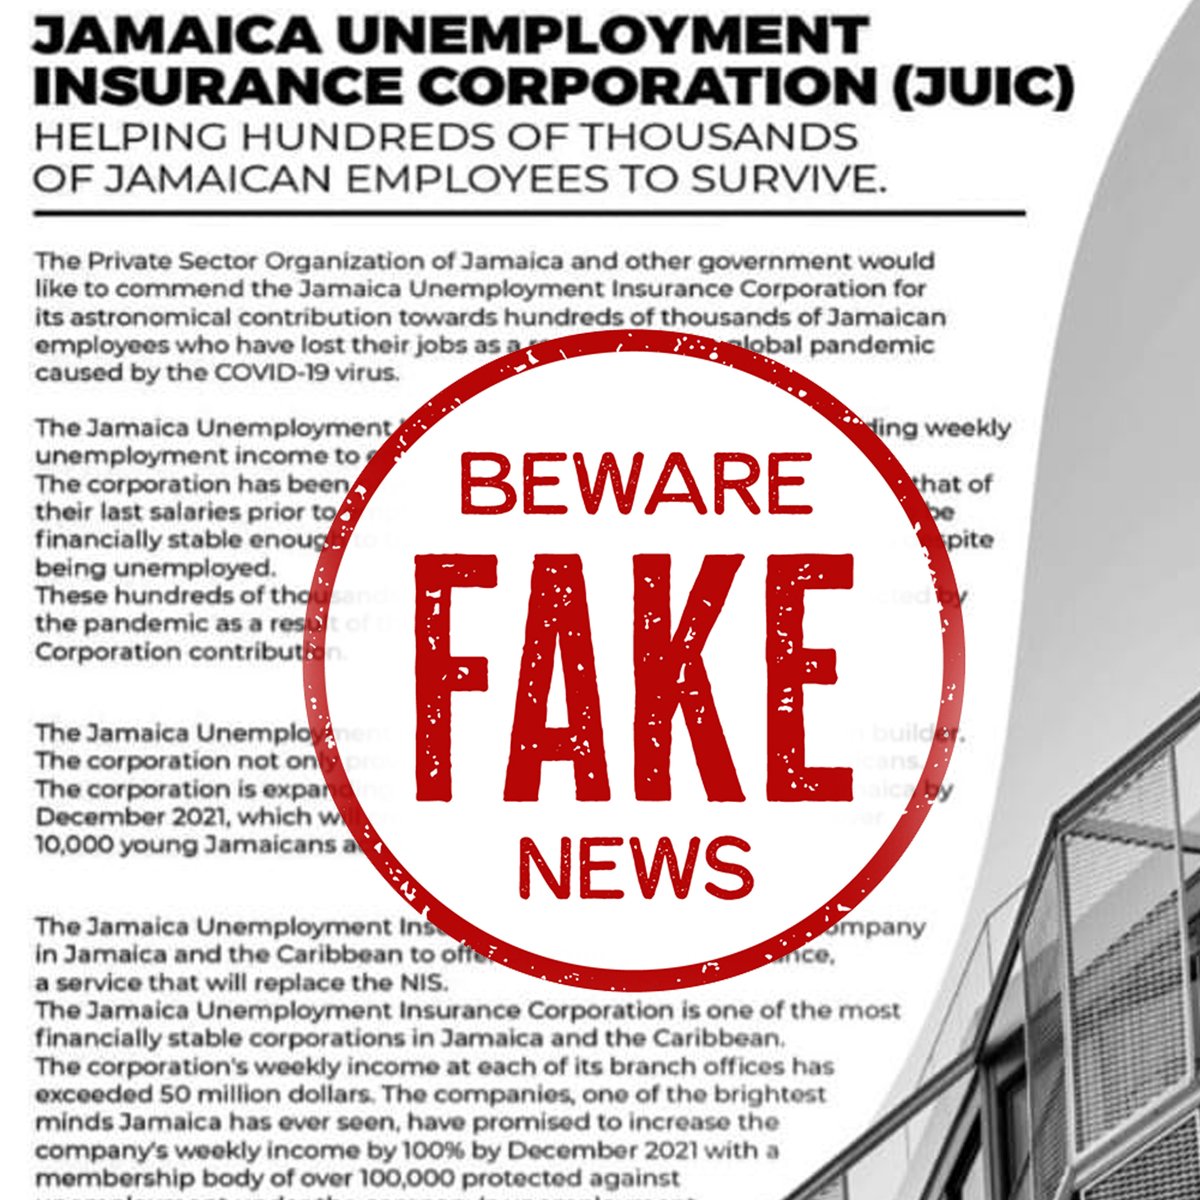 The PSOJ is aware that a graphic is circulating, purporting our support and endorsement of an entity under the name 'Jamaica Unemployment Insurance Corporation (JUIC)'. We explicitly state that this is false and The PSOJ is in no way affiliated with or aware of this entity.